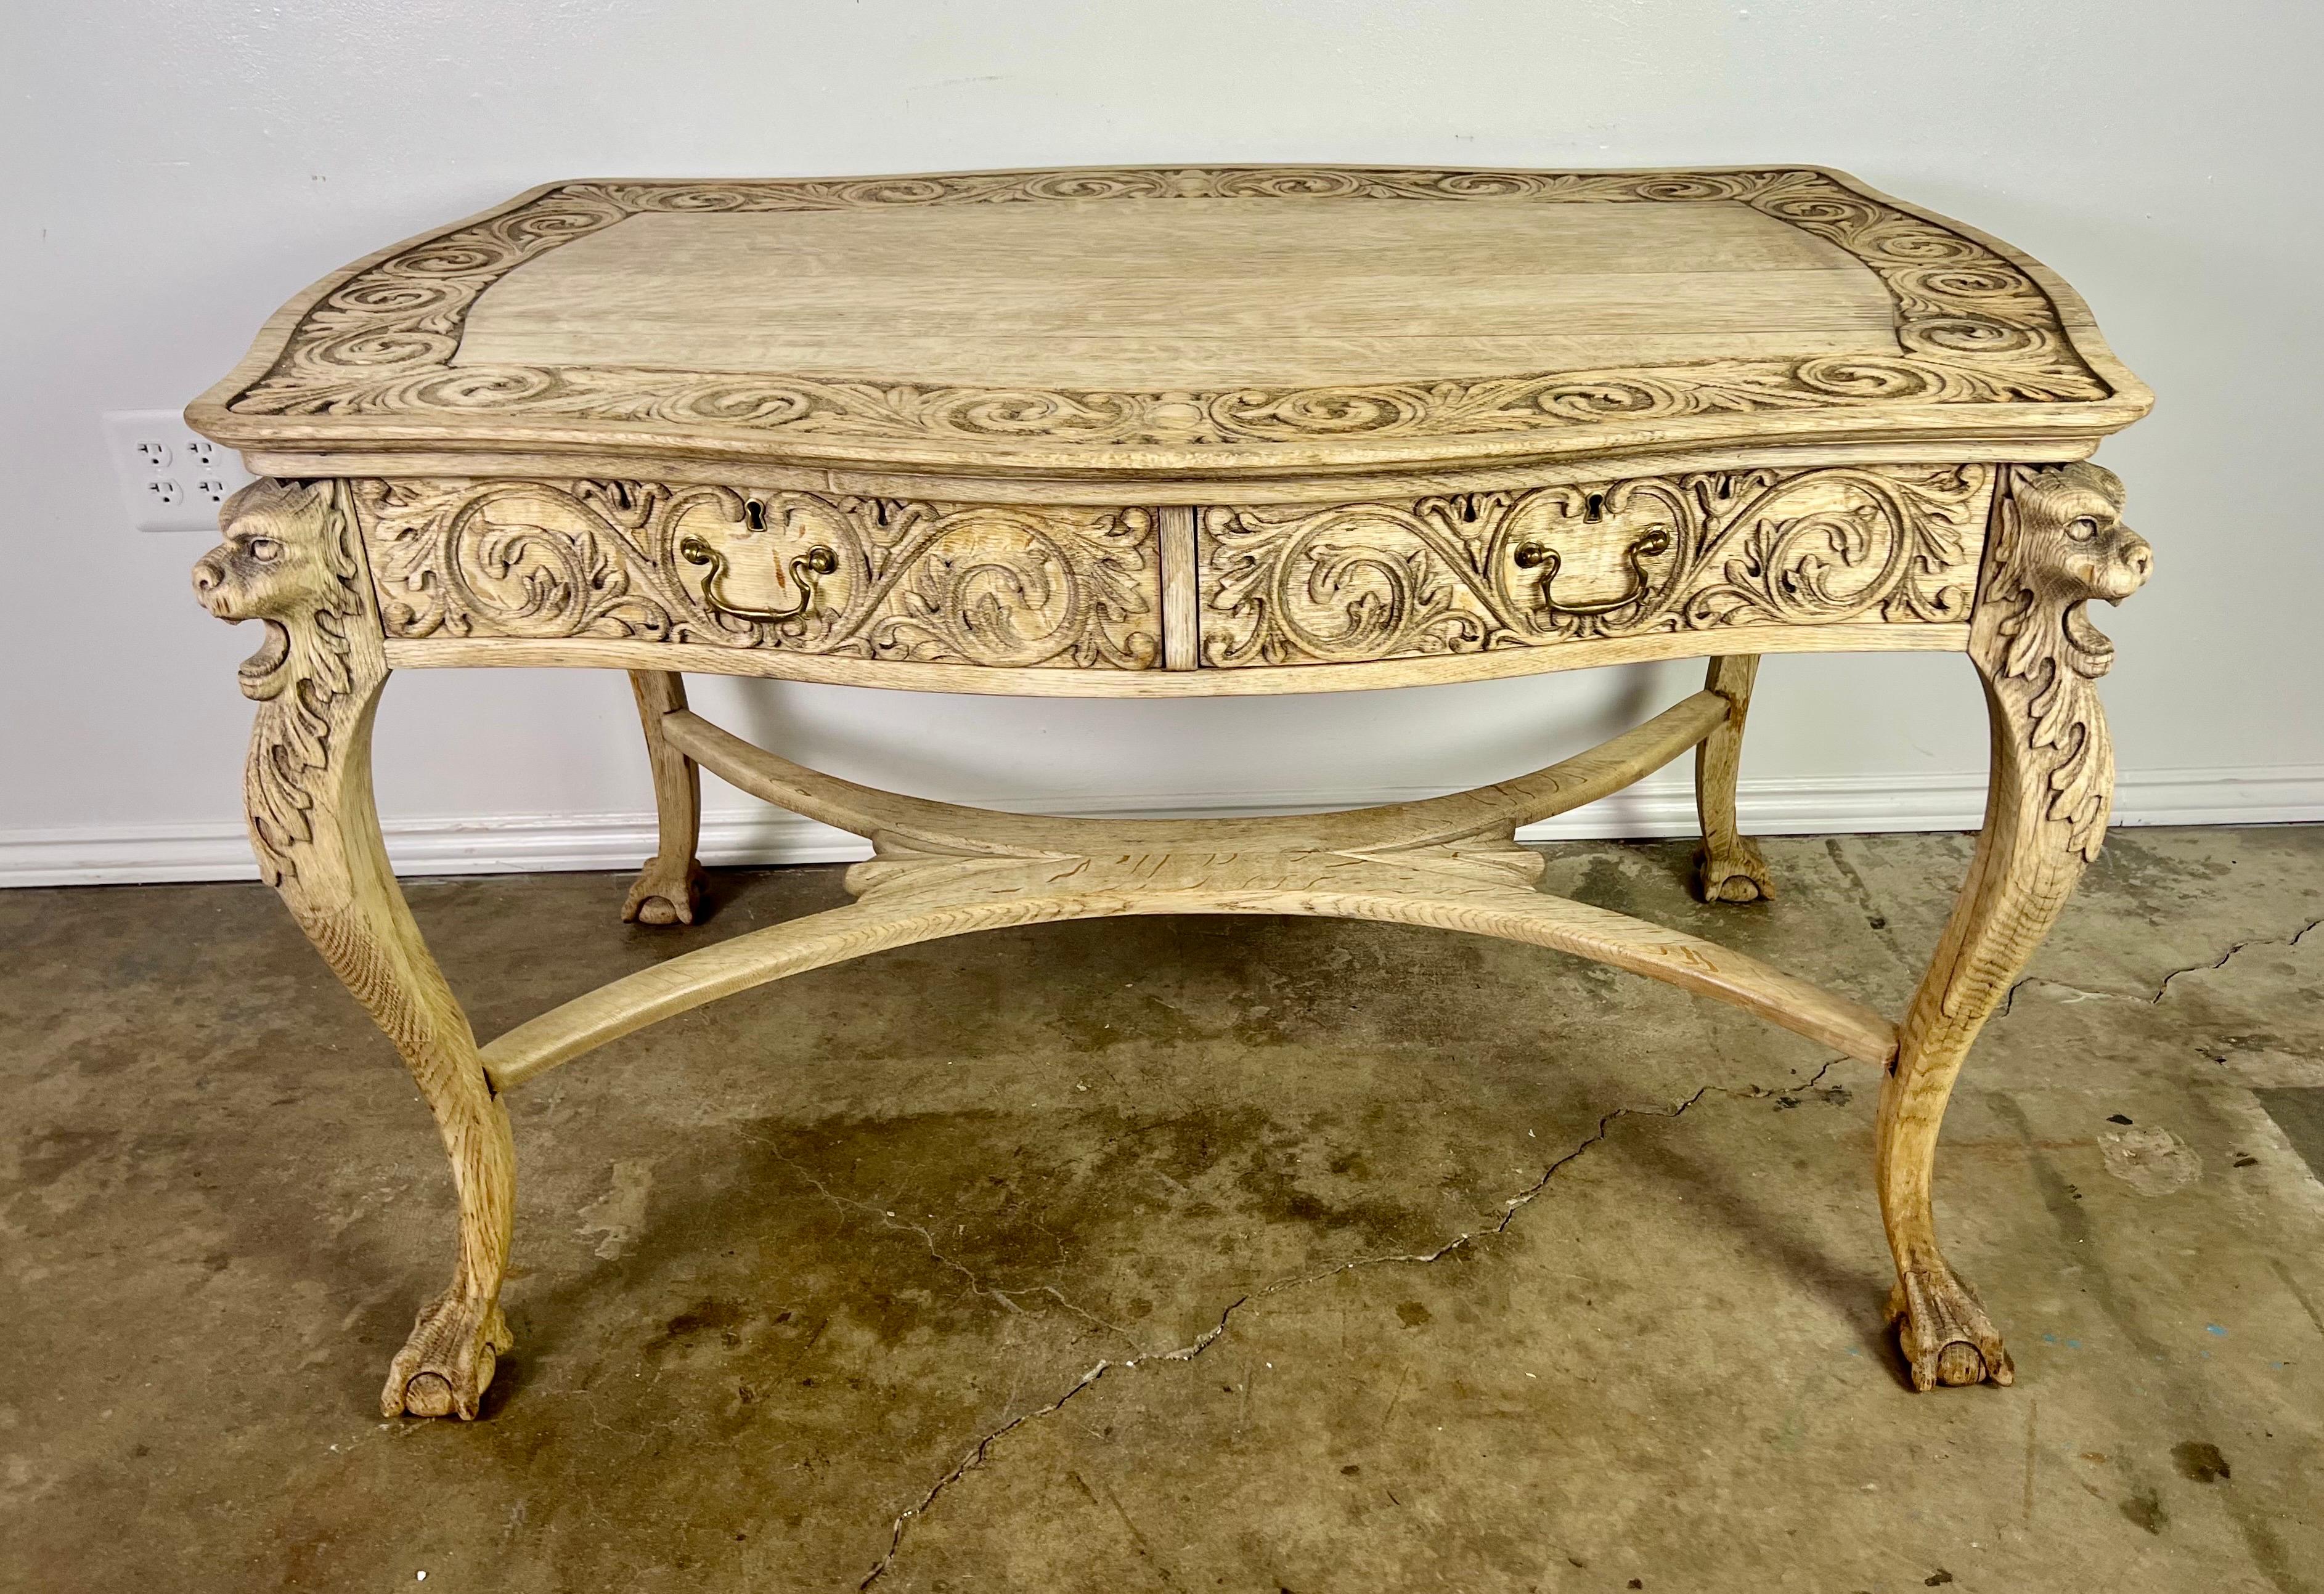 19th century Hand carved English writing partners desk. There are two working drawers on either side so the table can float in your room. It stands on four ball & claw feet. The table is finely carved with details of lion heads, acanthus leaves,